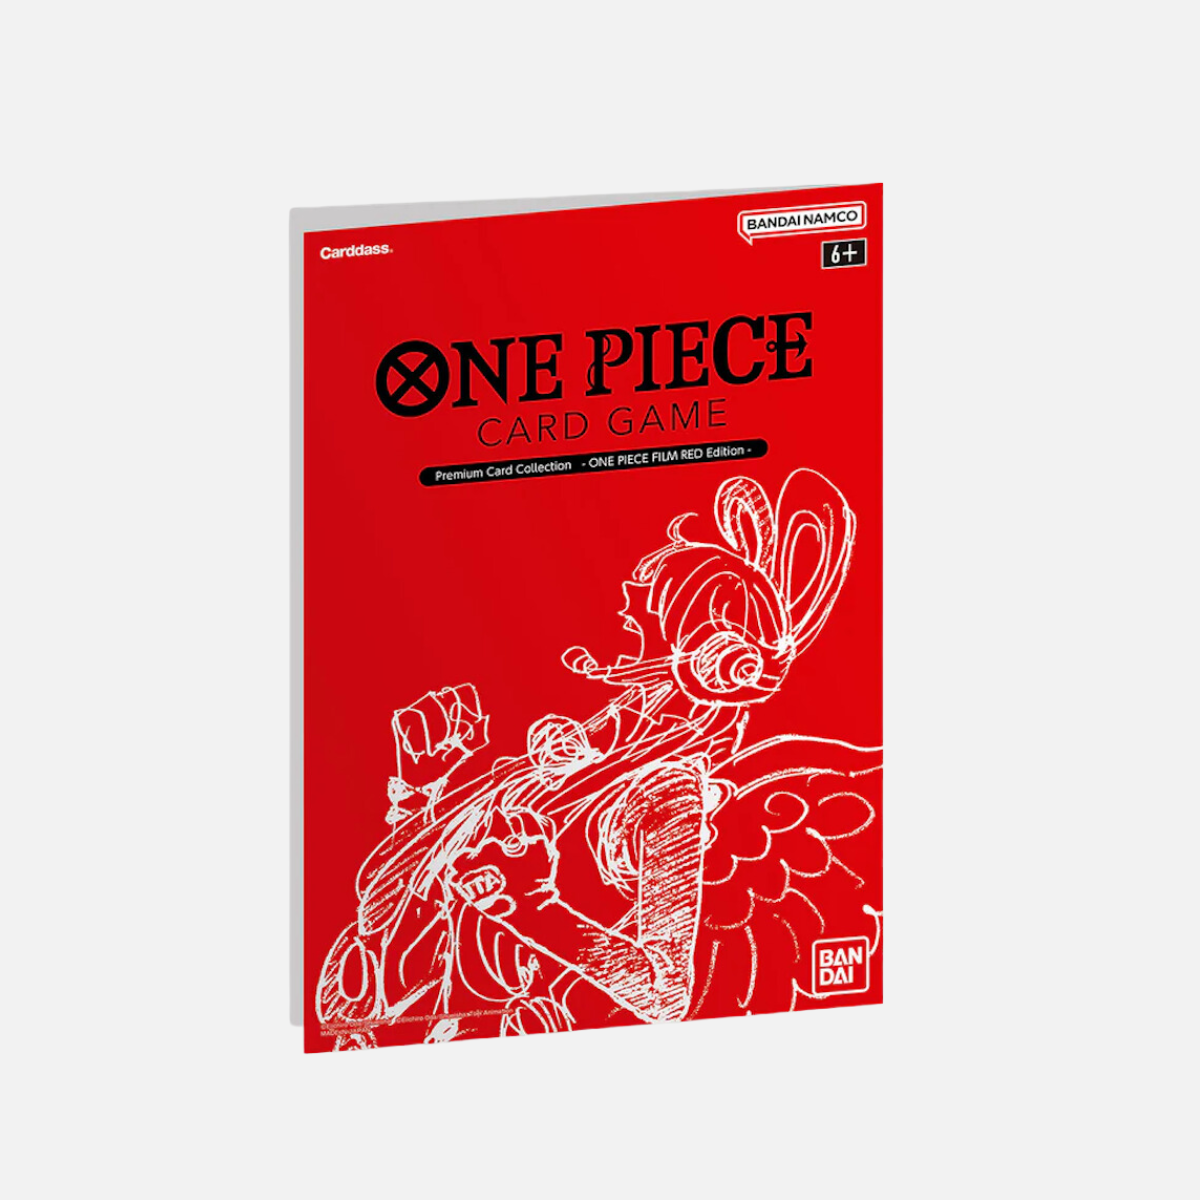 Premium Card Collection One Piece Film Red Edition